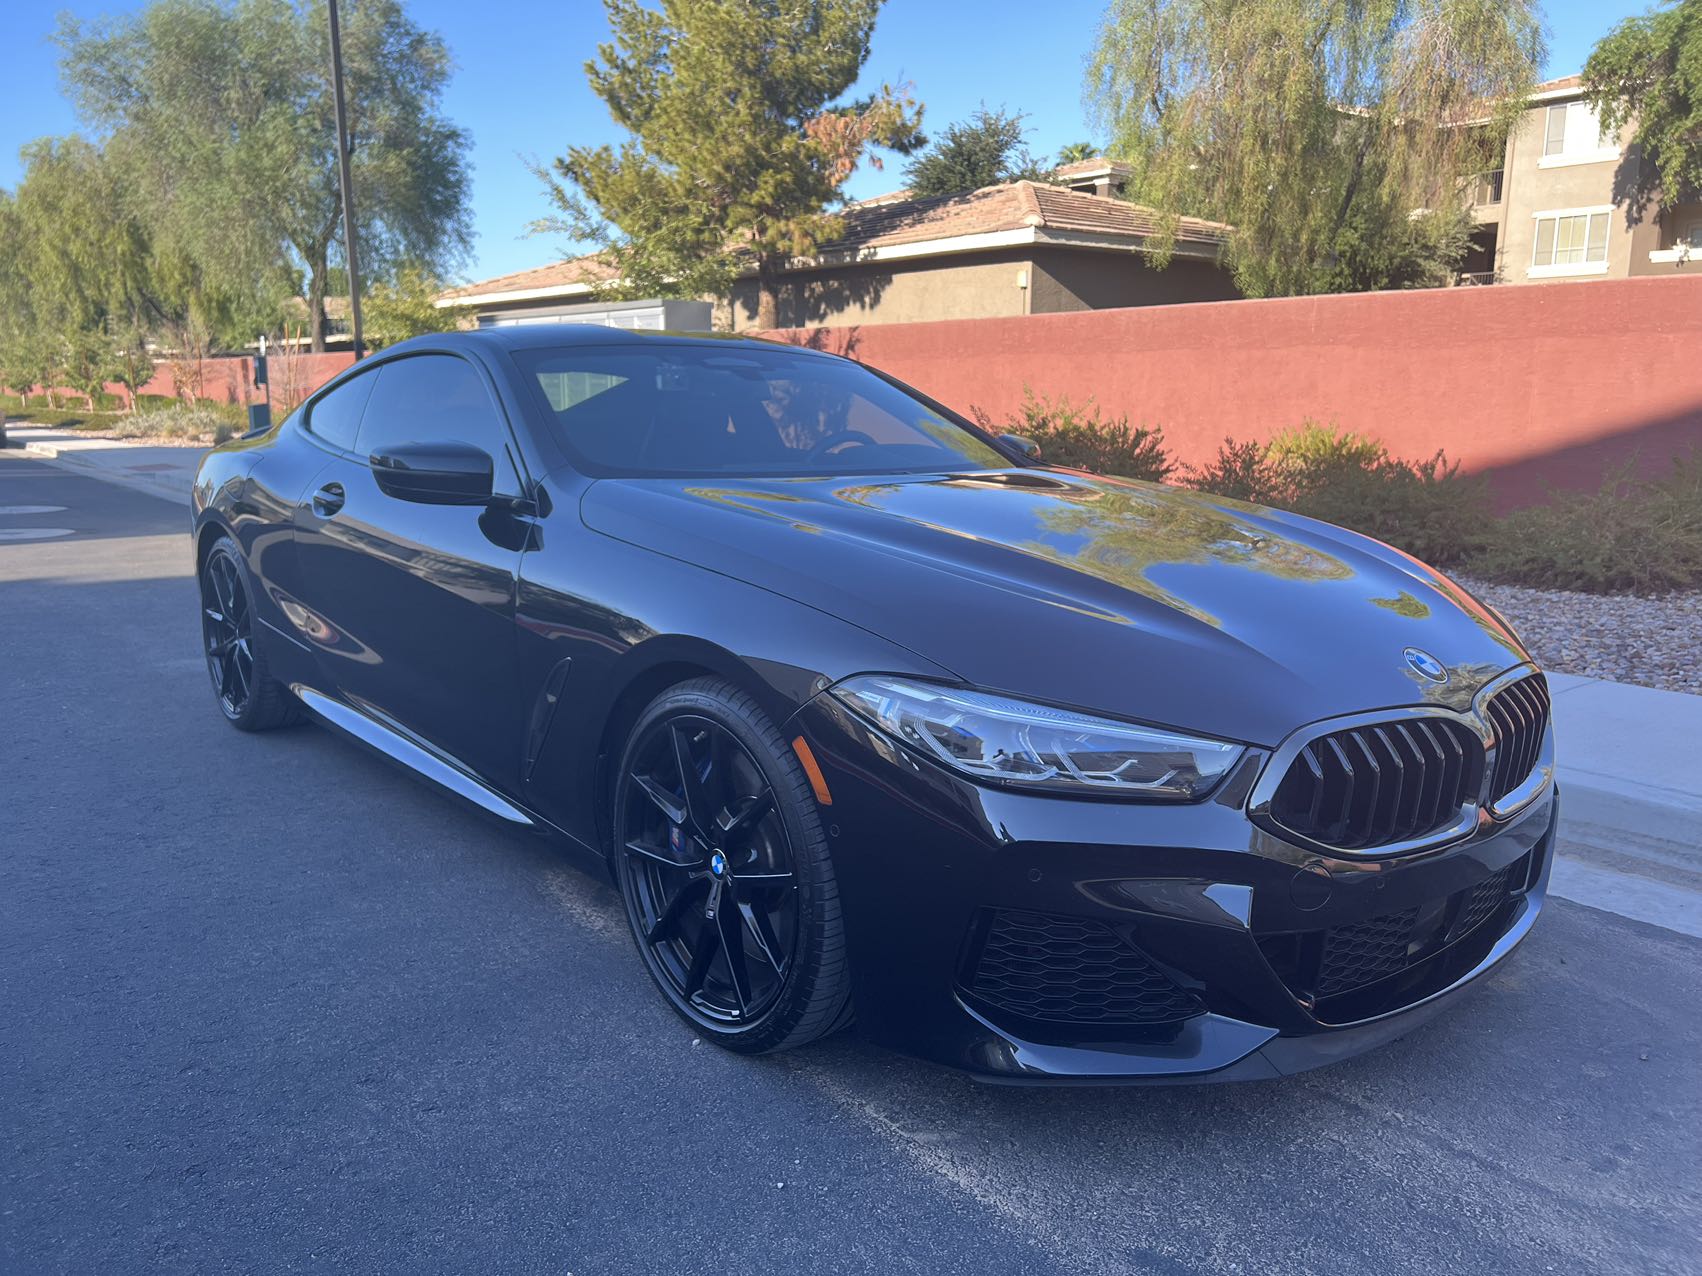 Used BMW M850i xDrive for Sale - Autotrader